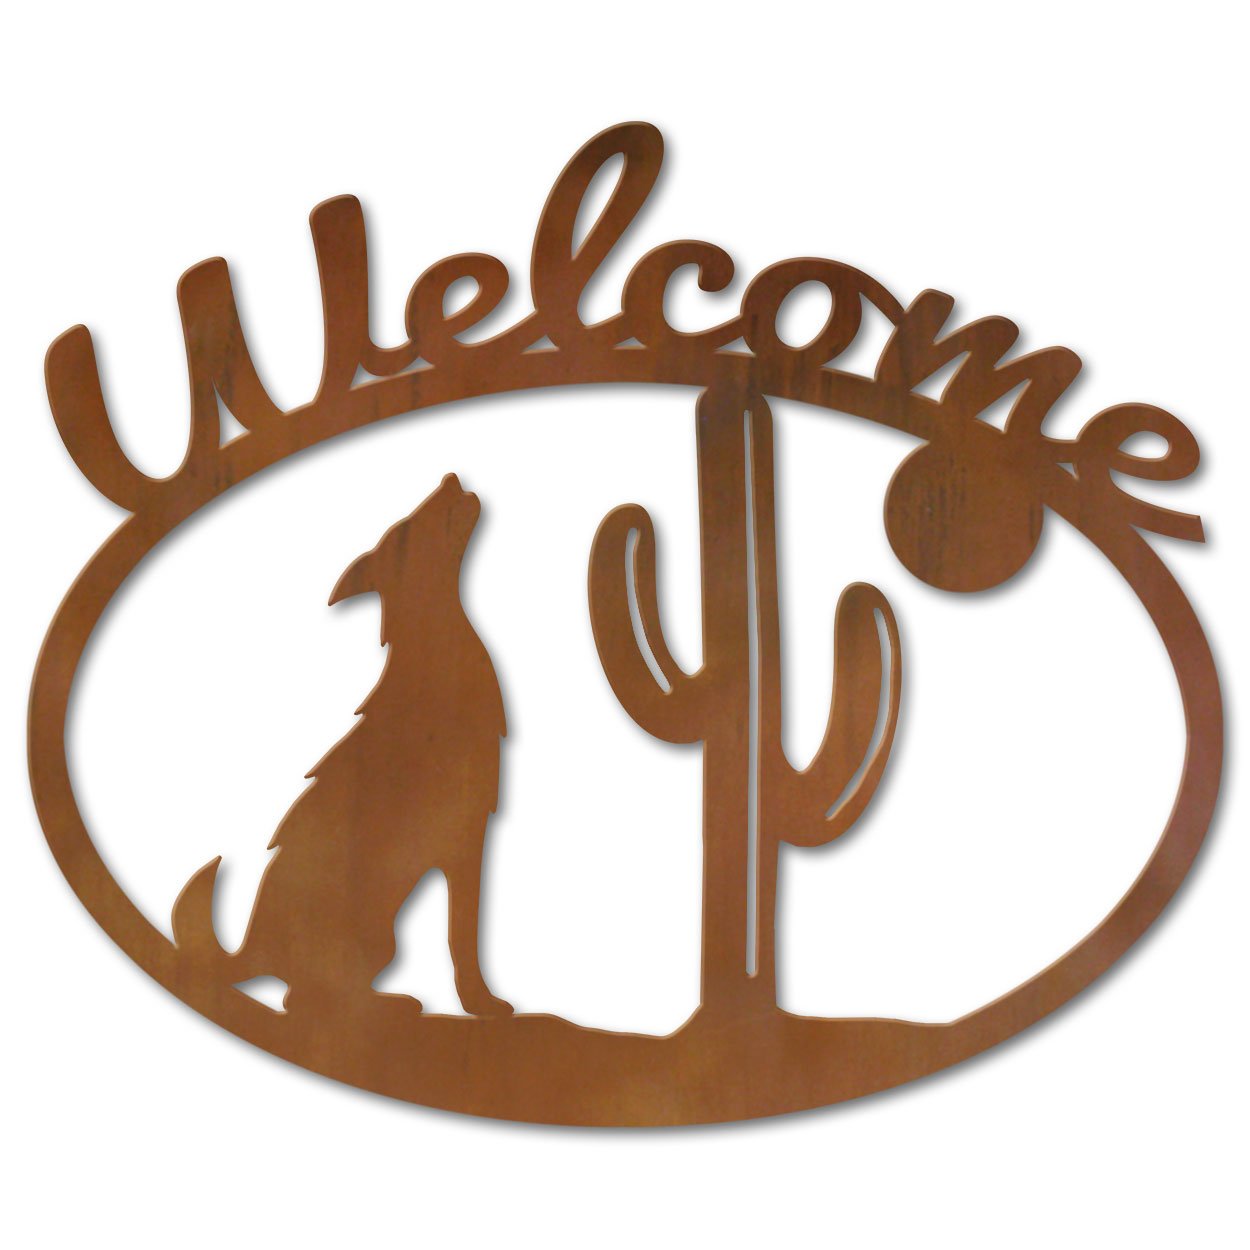 600209 - Coyote and Cactus Metal Welcome Sign Wall Art